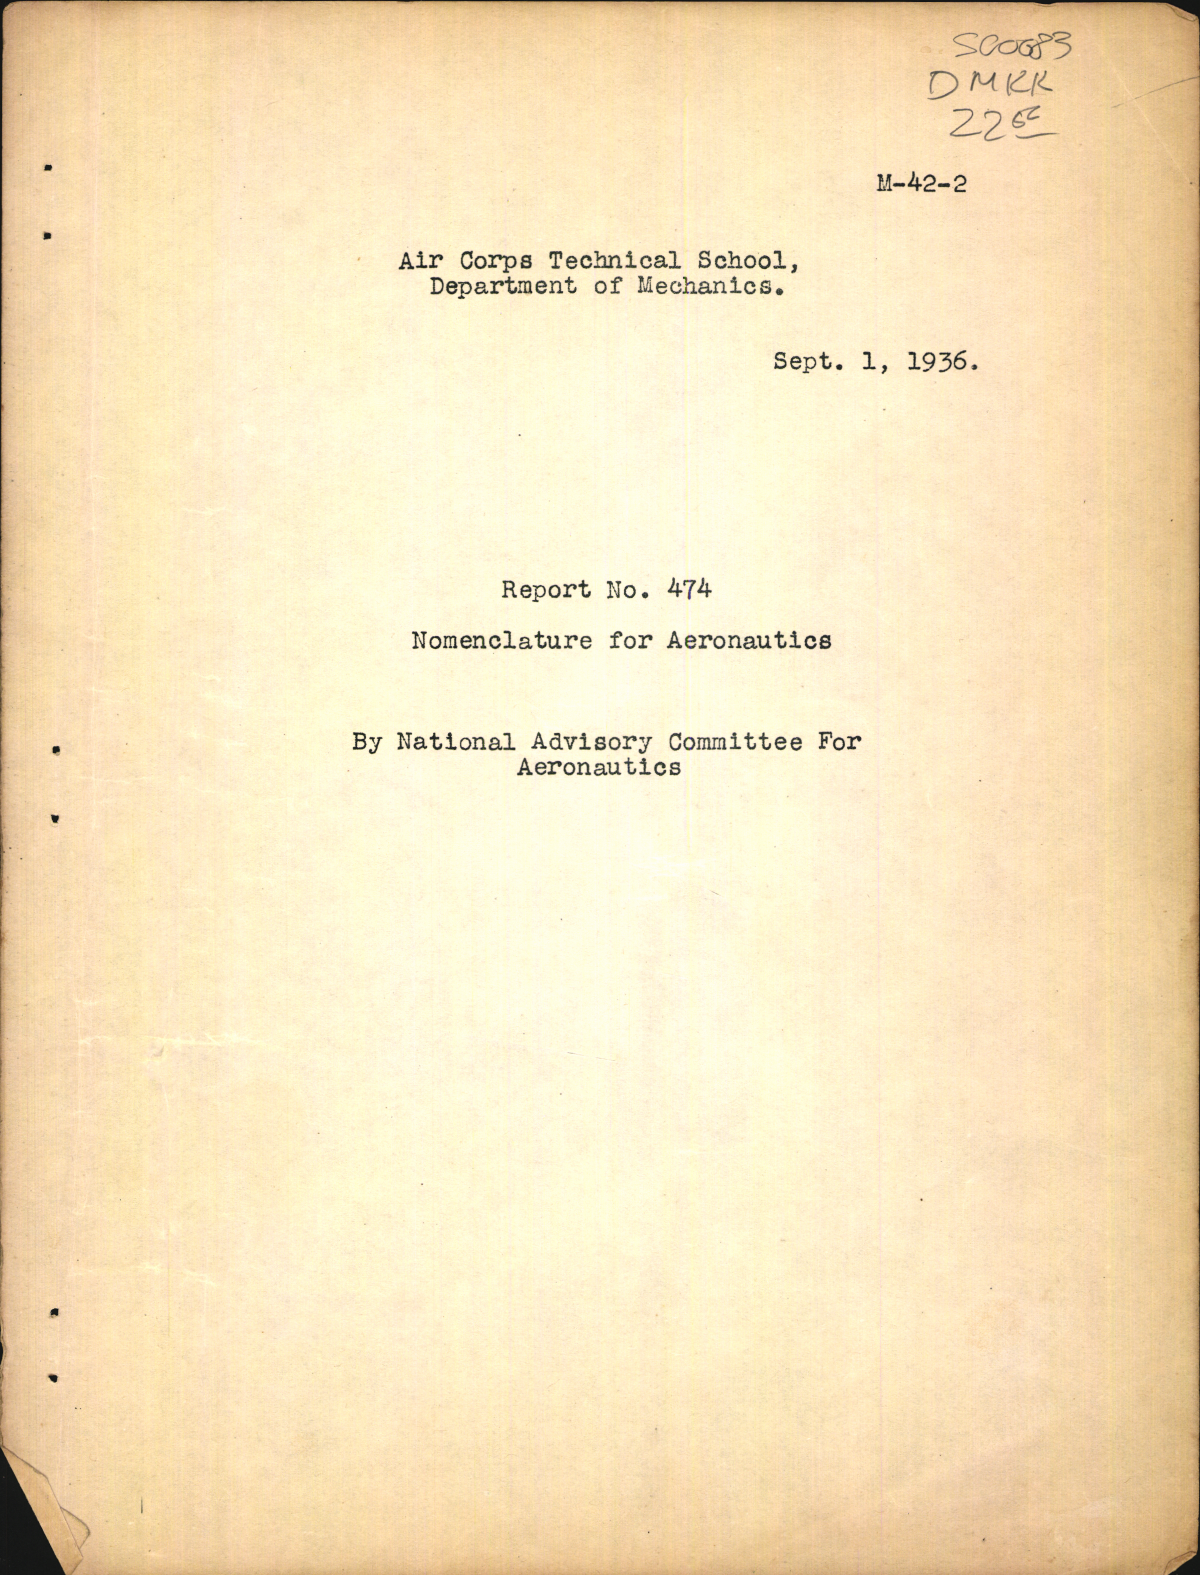 Sample page 3 from AirCorps Library document: The Air Corps Technical School; Nomenclature for Aeronautics 